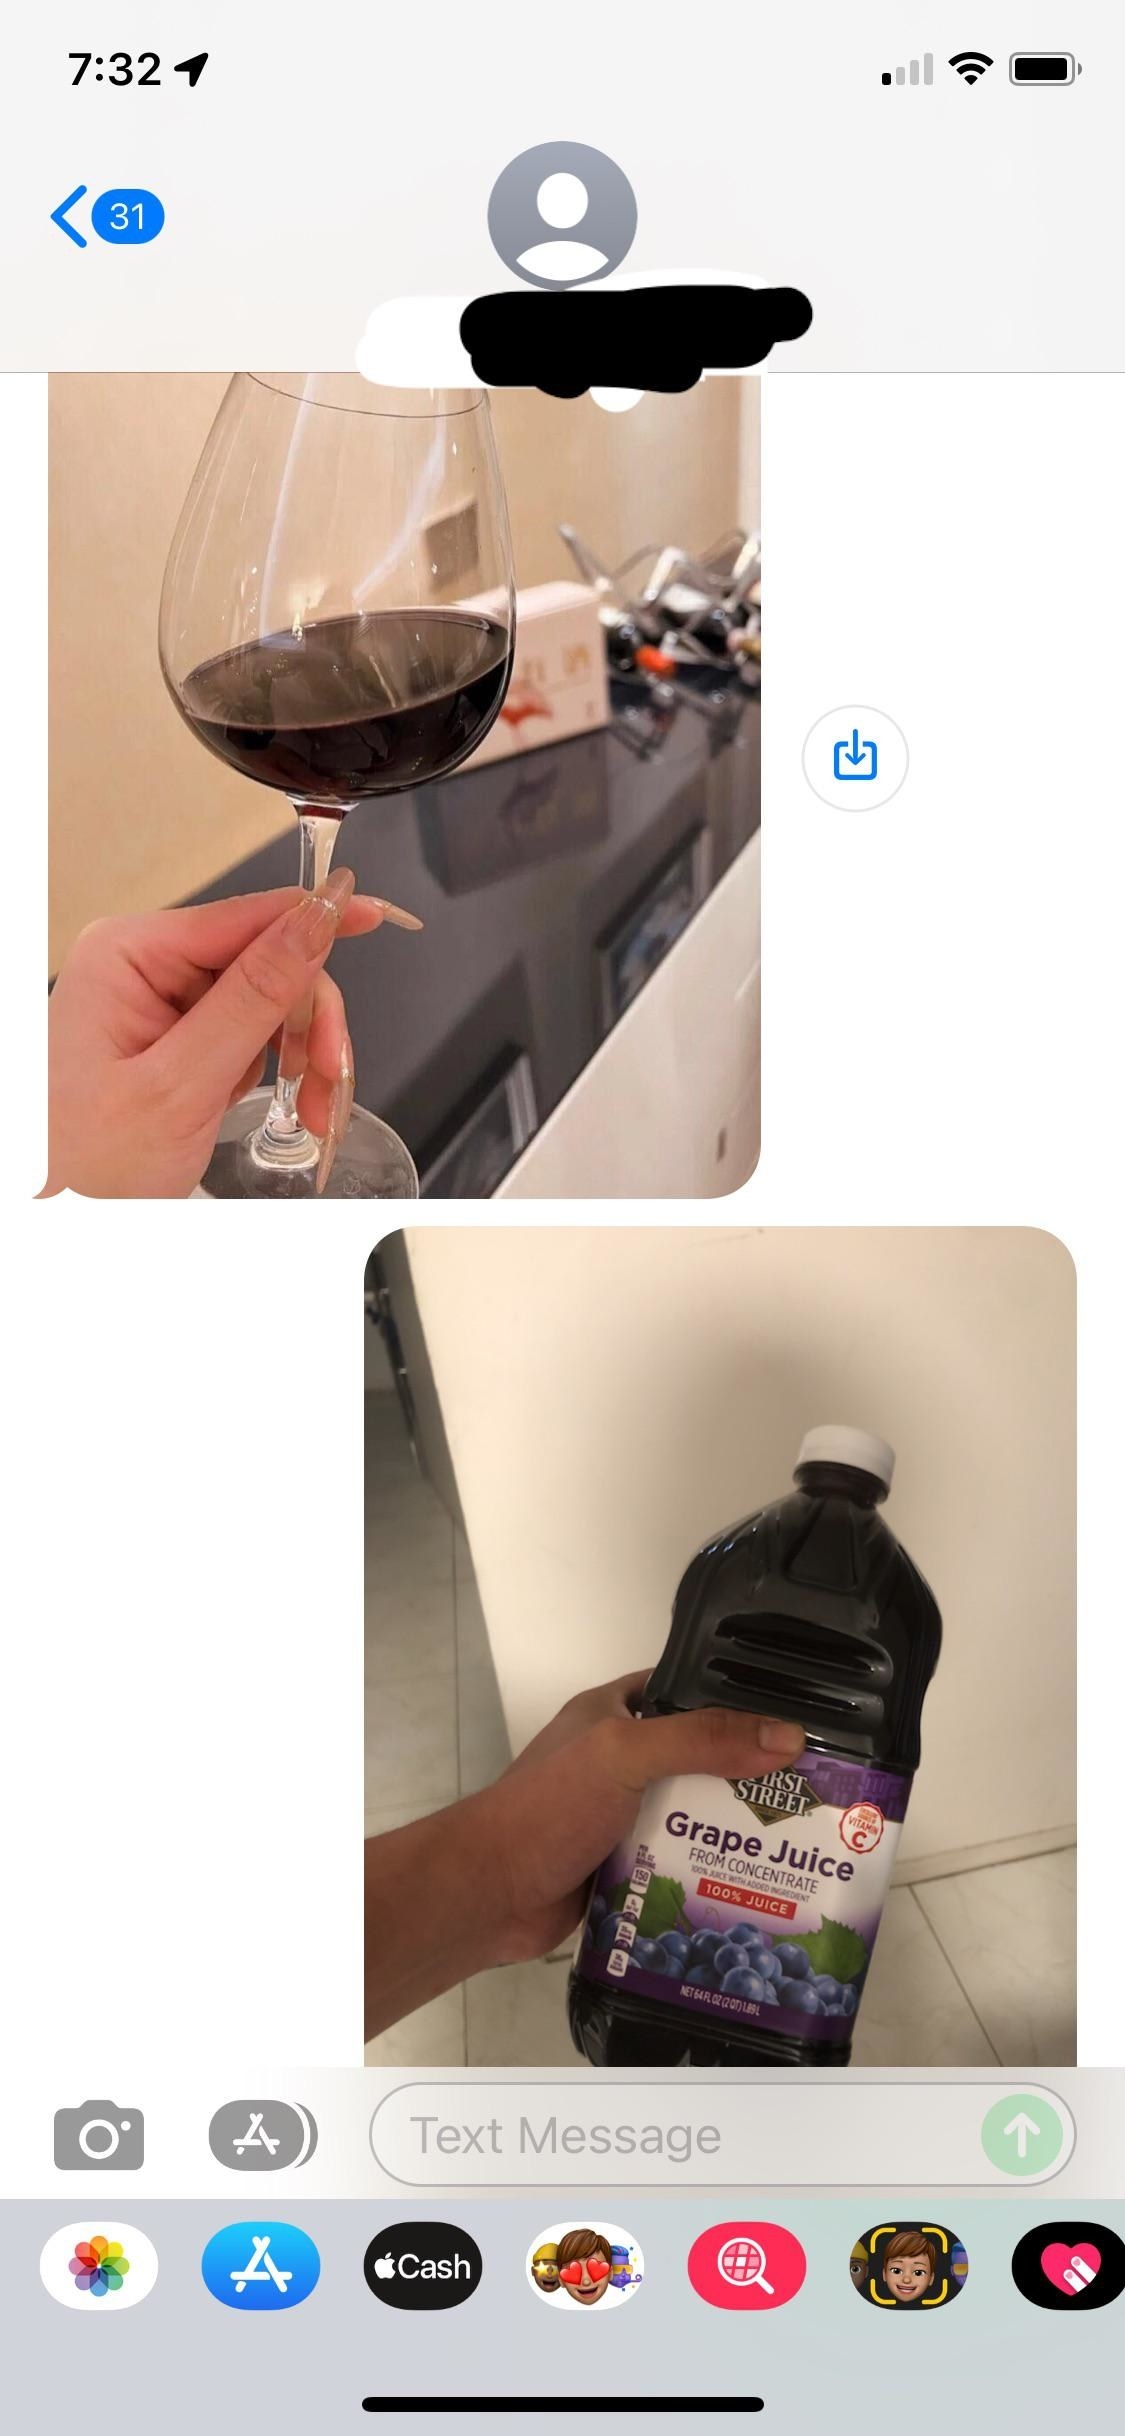 wrong number text of someone sending a glass of wine and the other person sends a bottle of juice